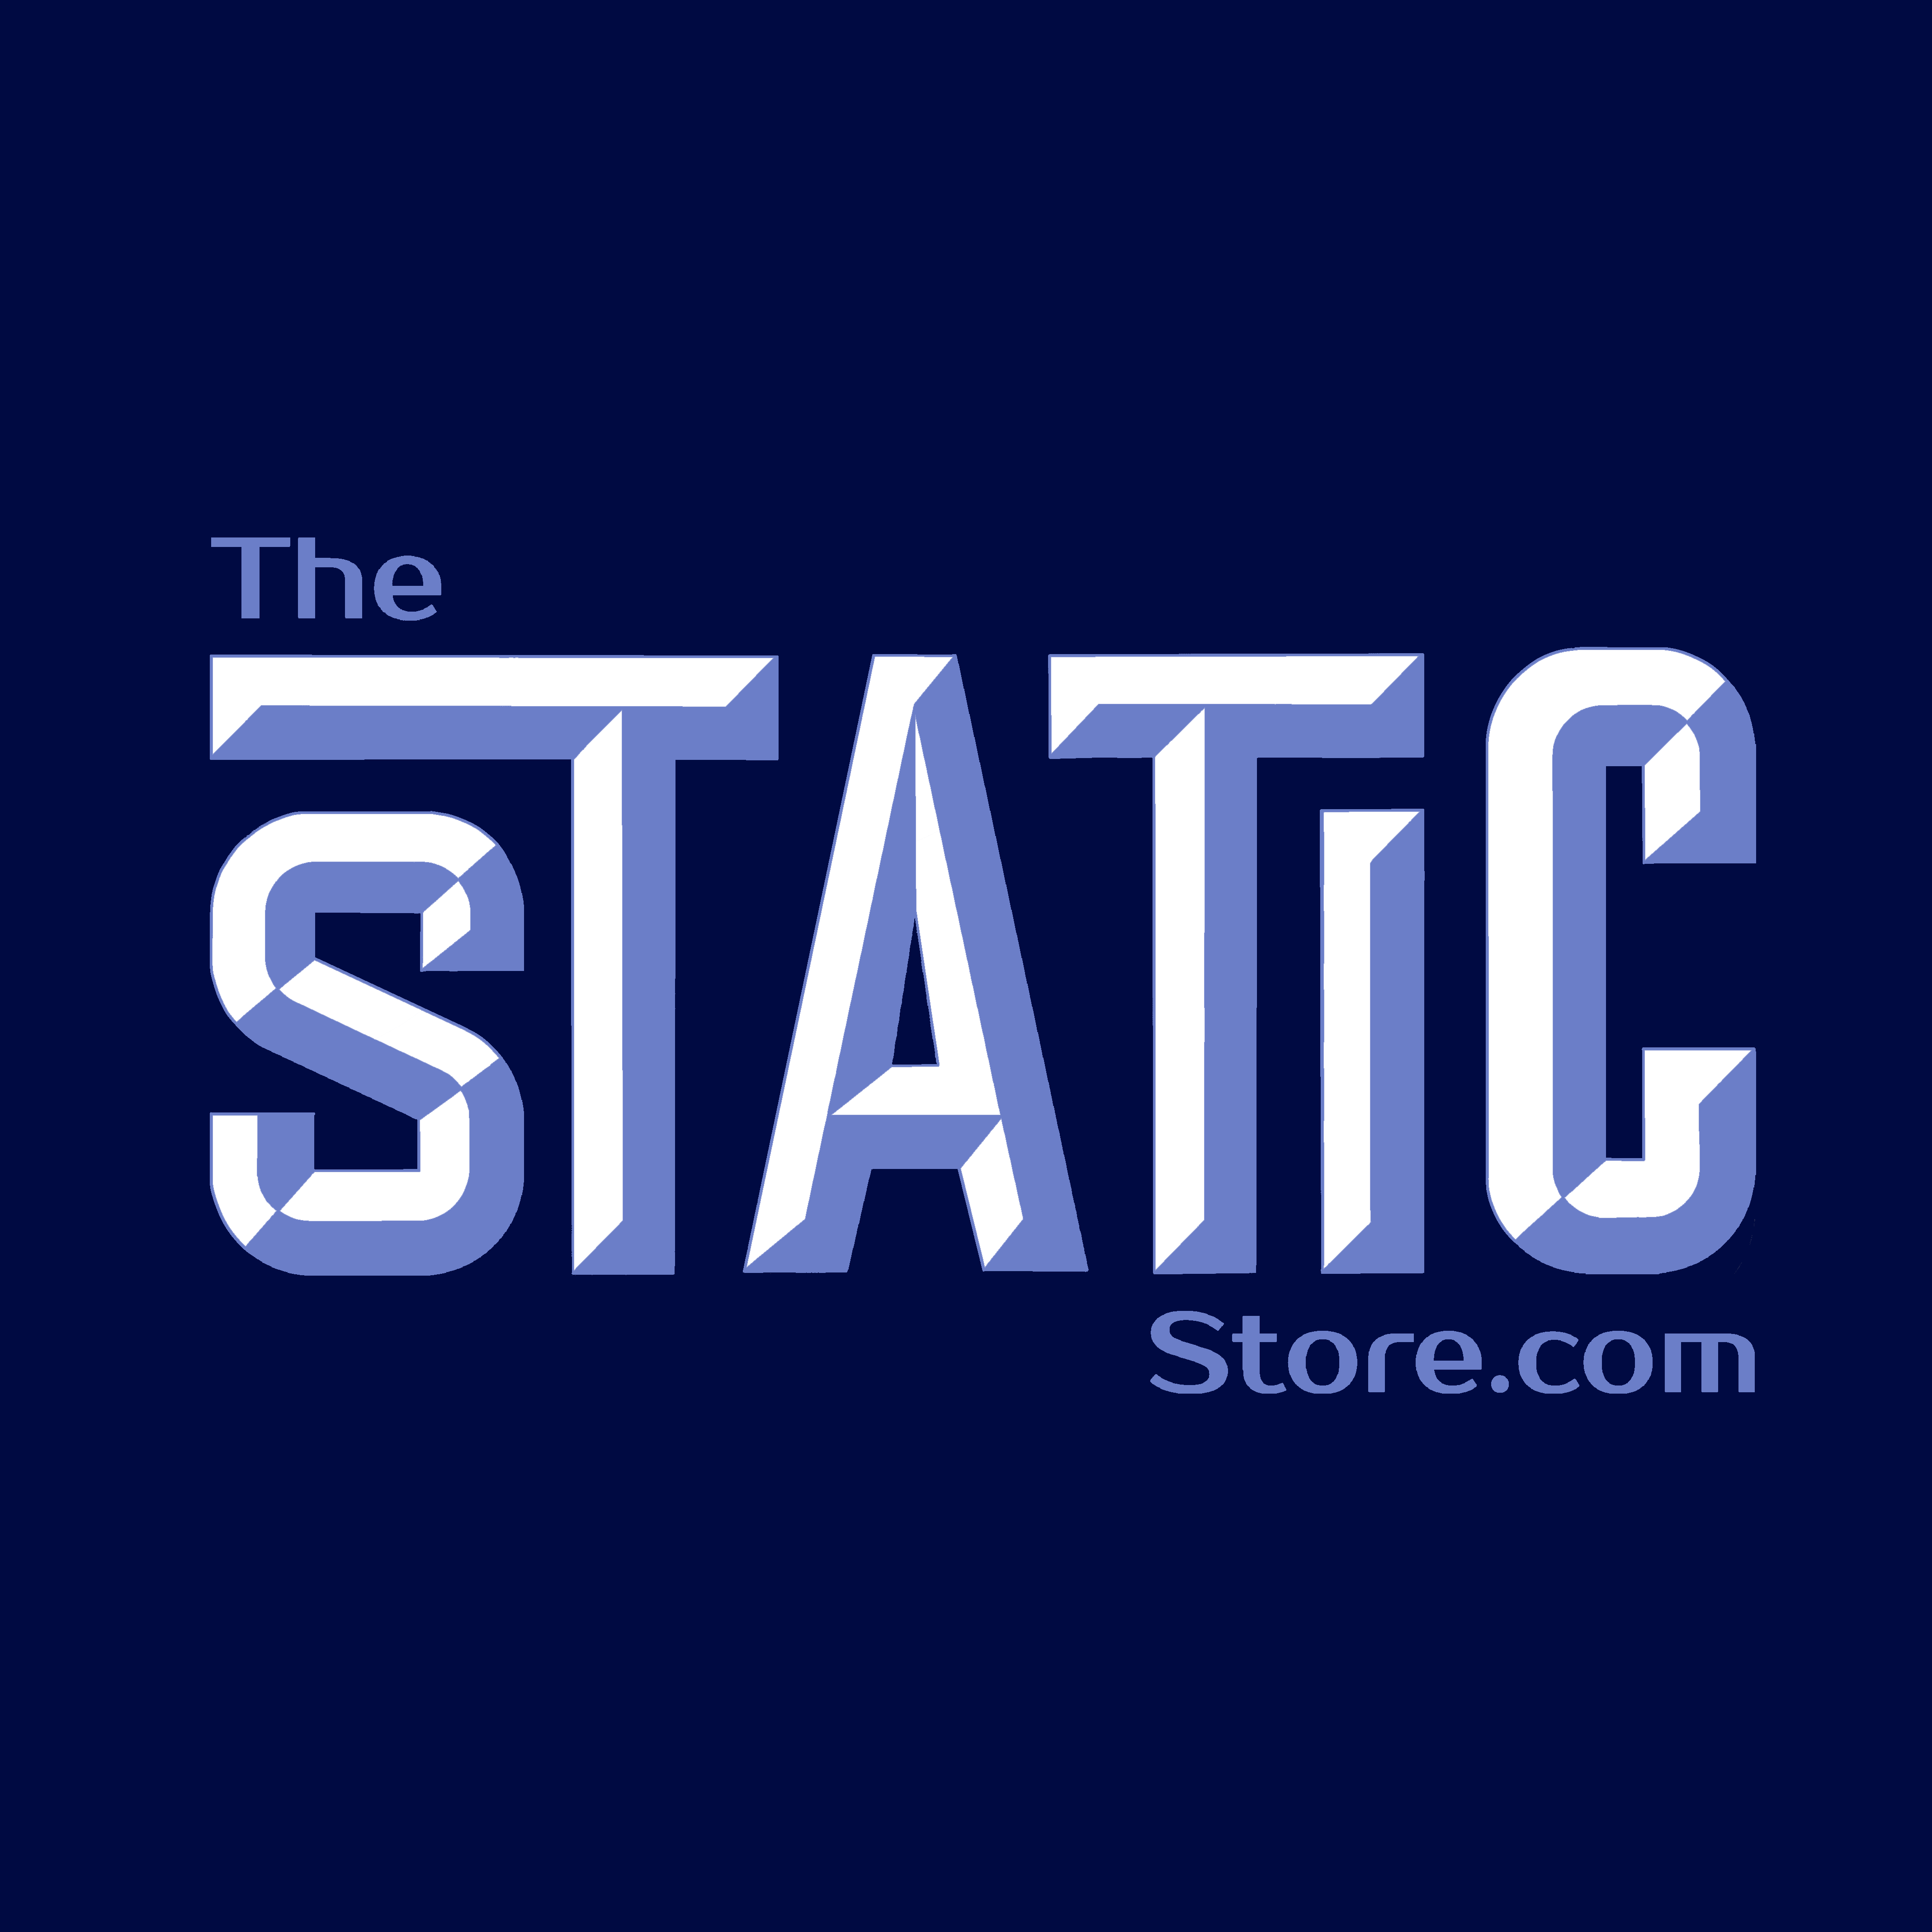 The Static Store